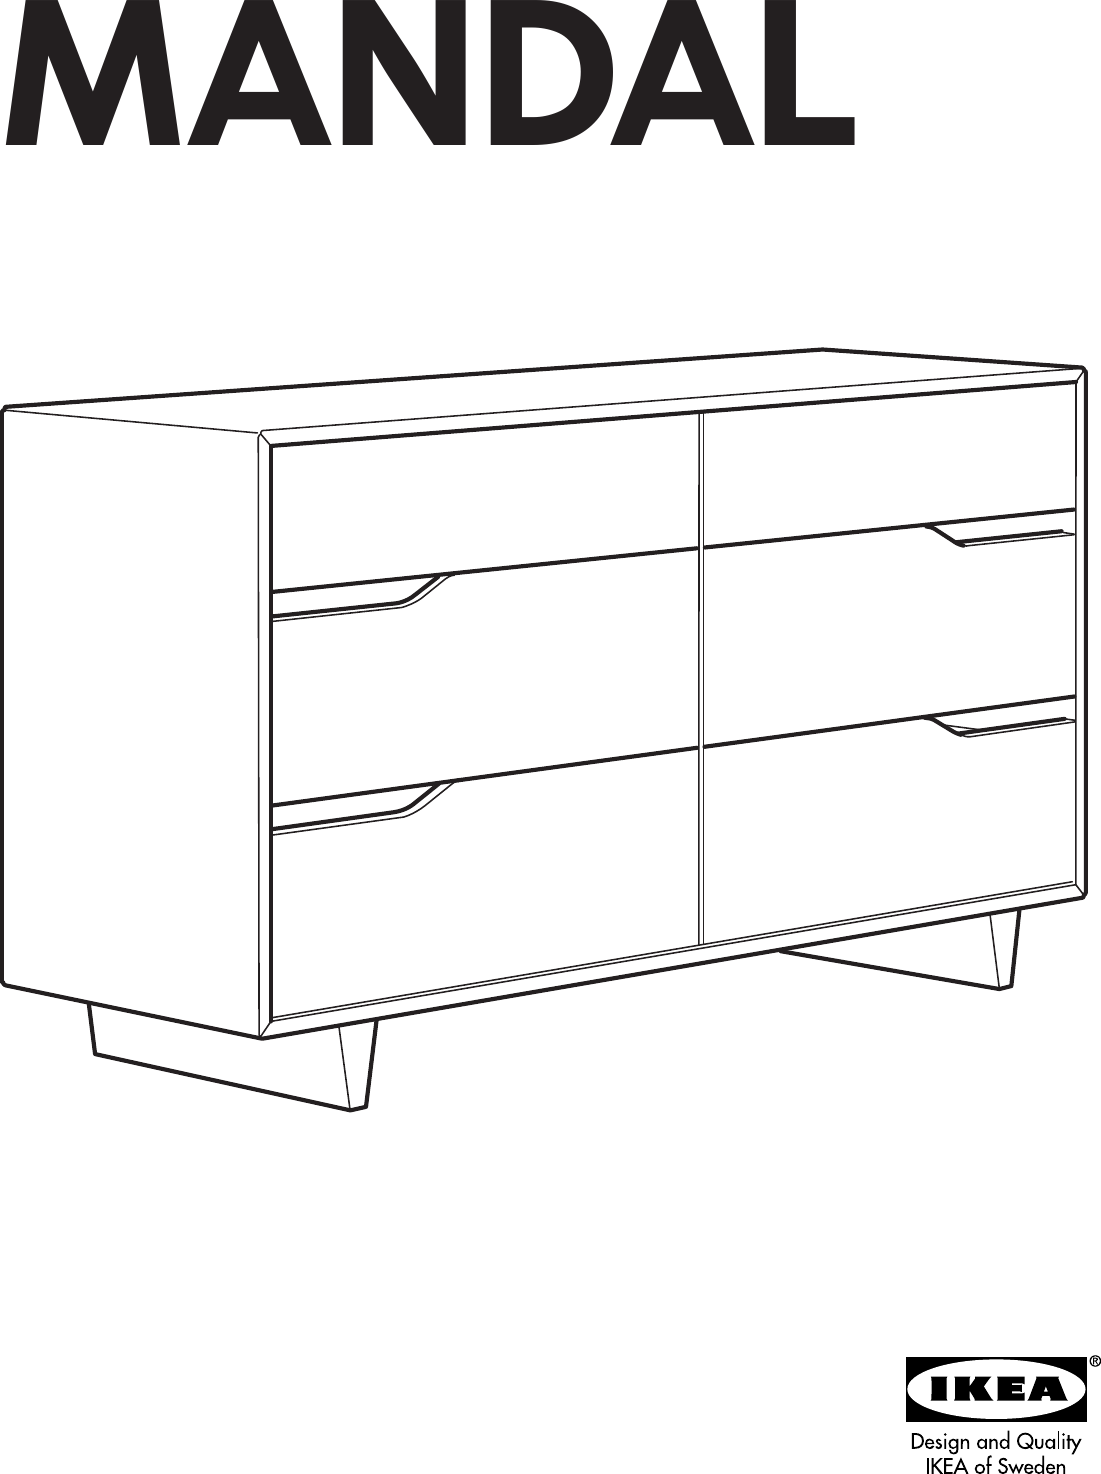 Ikea Mandal Chest W 6drawers 55x31 Assembly Instruction